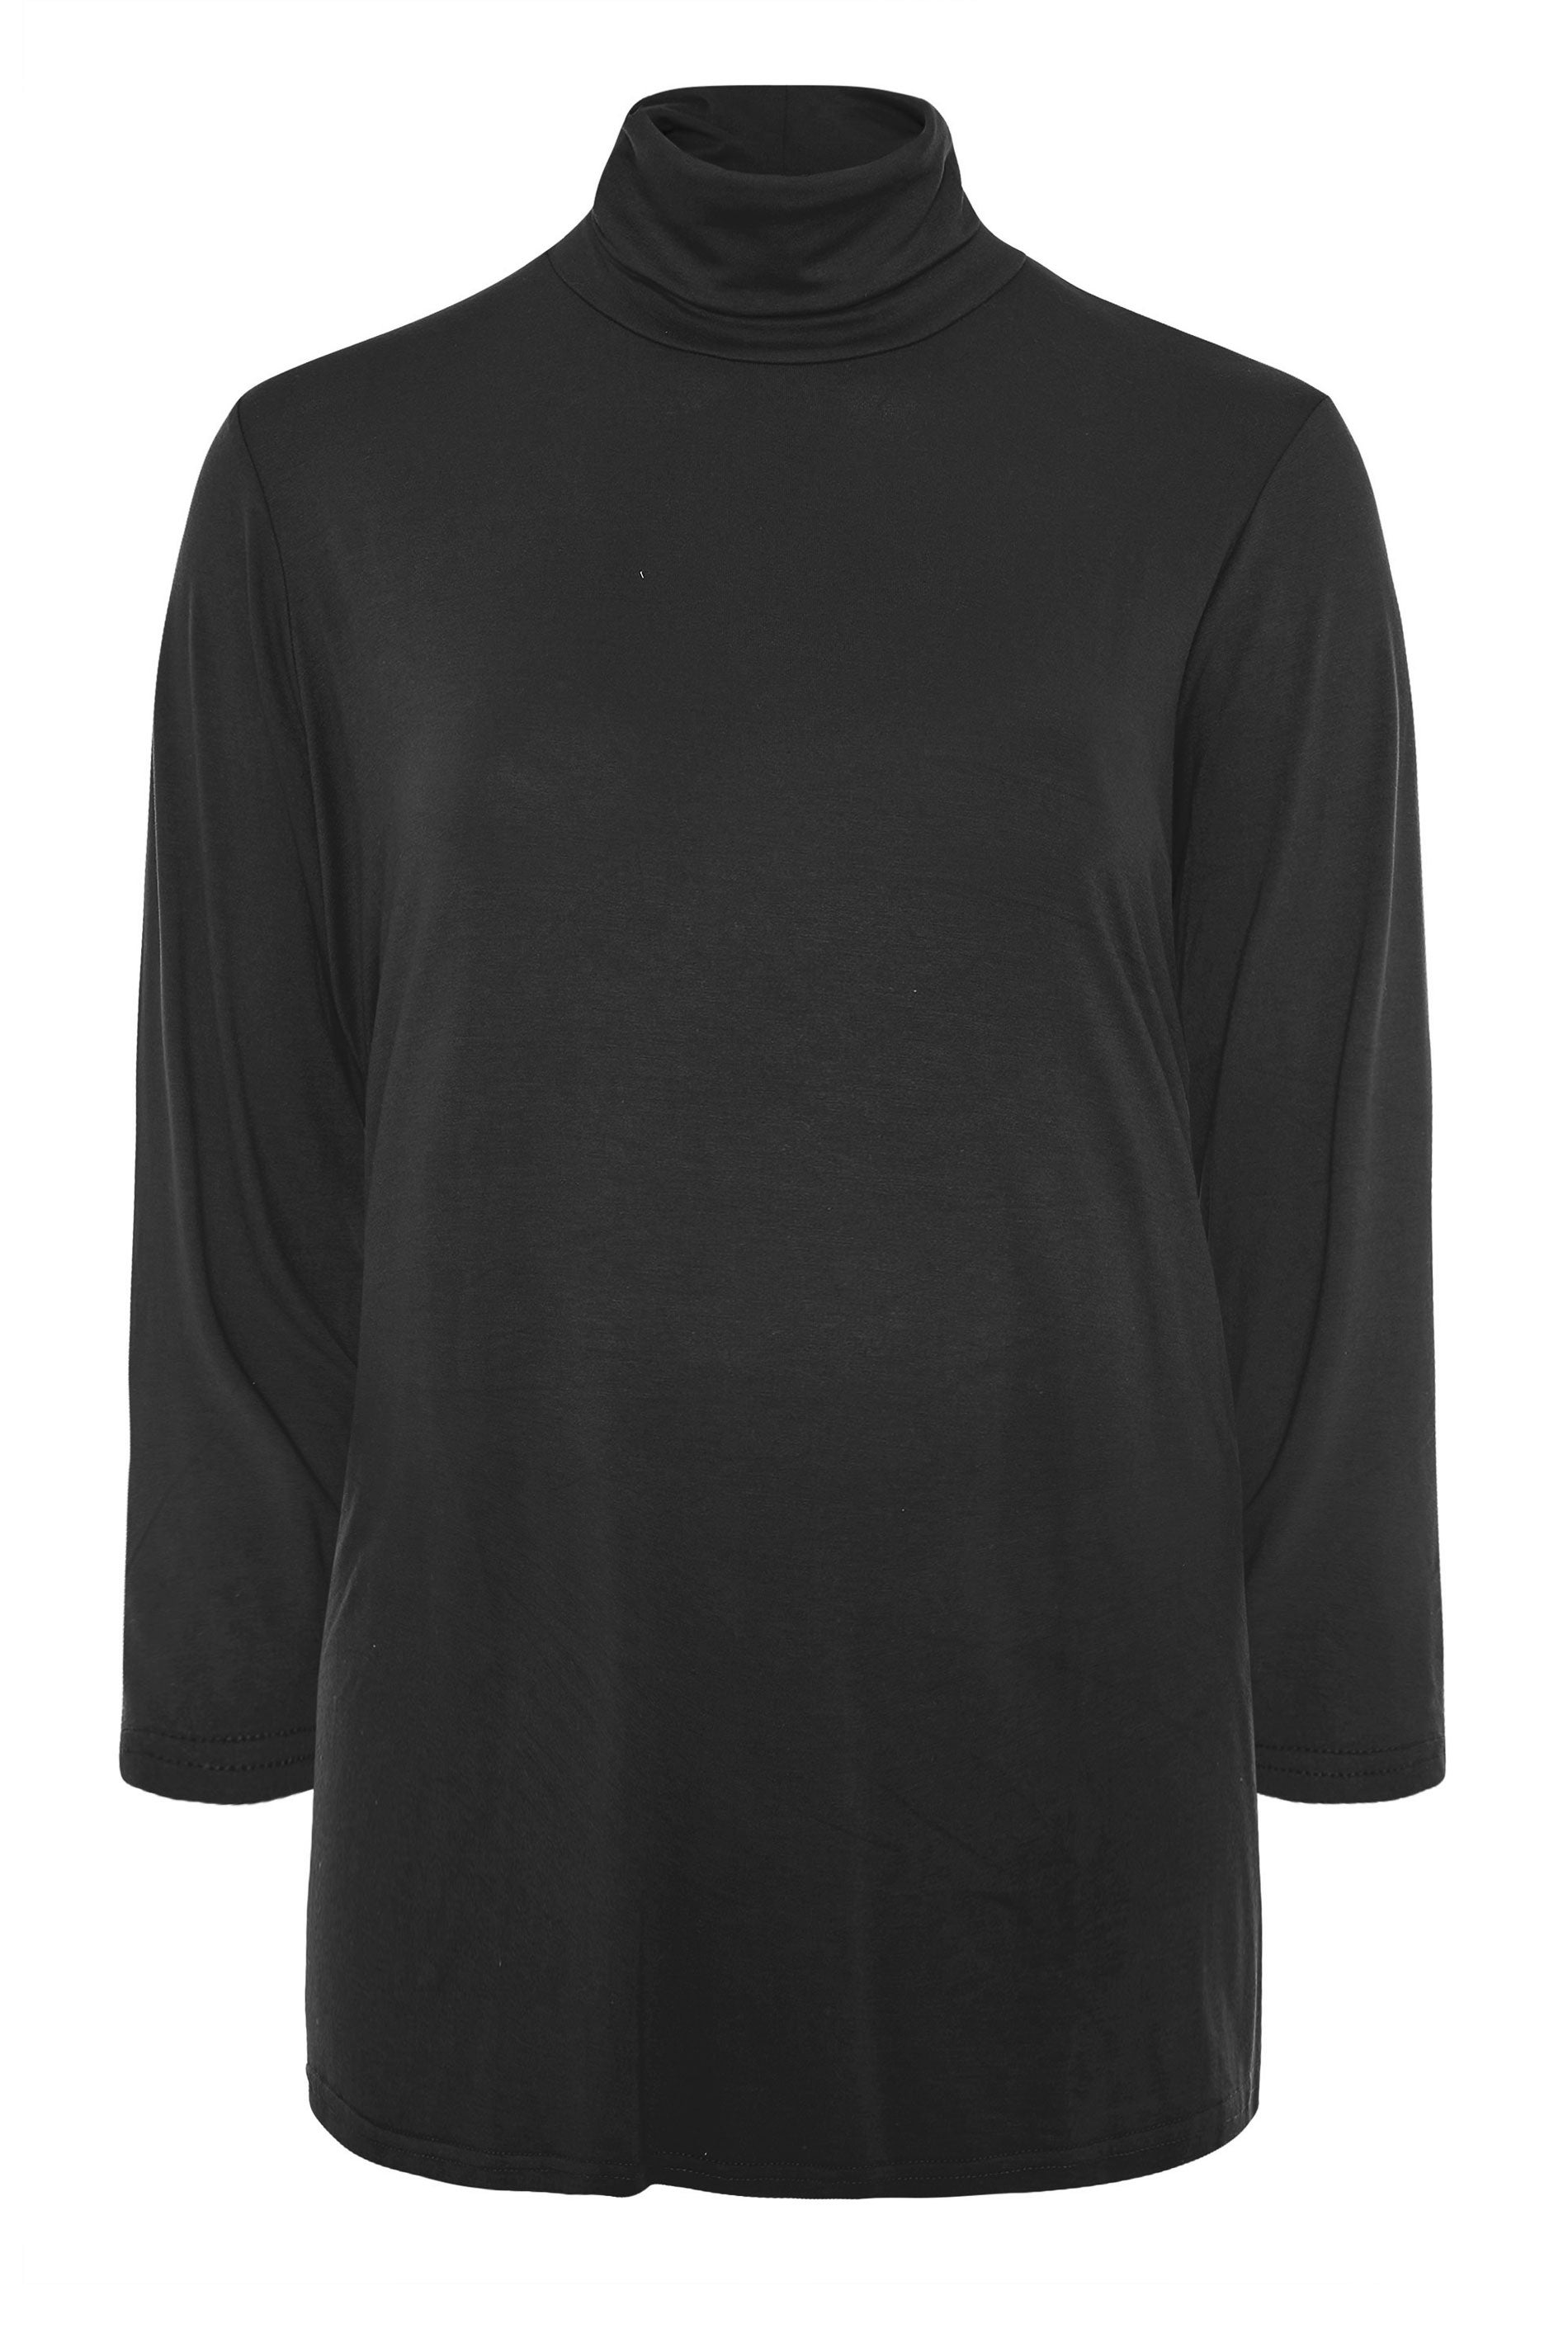 Yours Clothing + Curve Black Turtle Neck Top